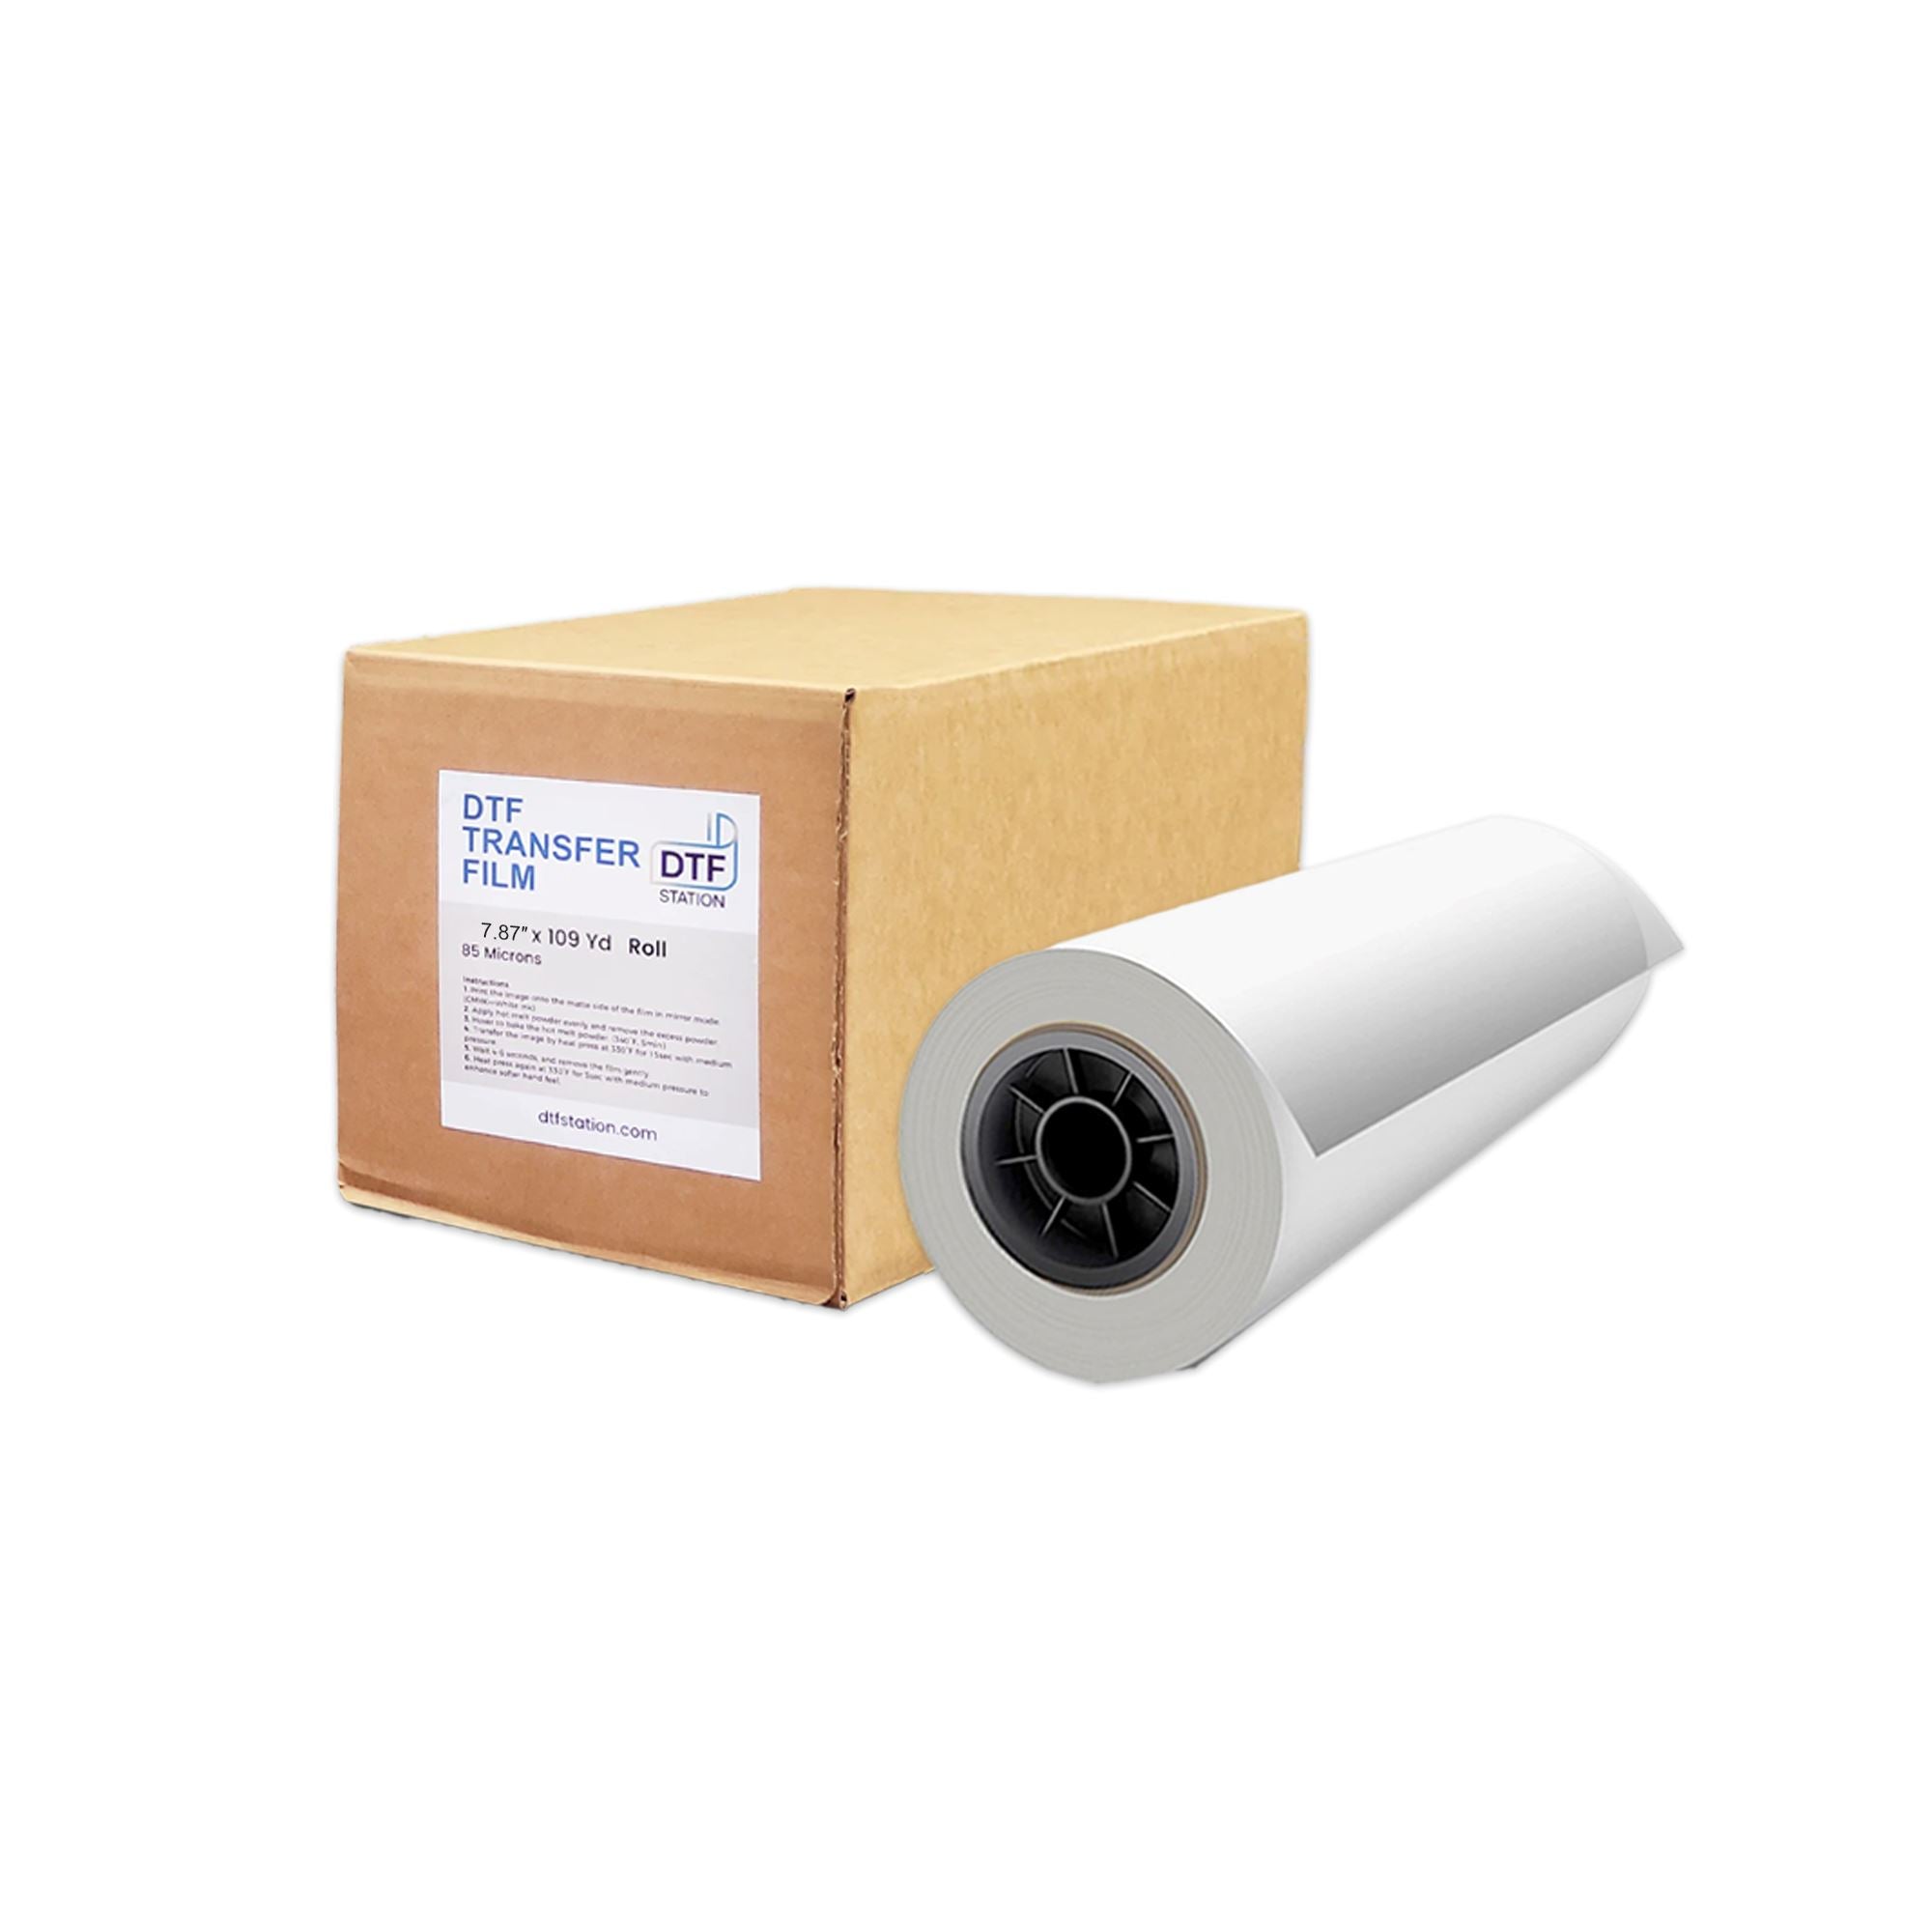 Shipping Paper Roll 1440'L X 24W, 1-Pack, Large White Paper Roll for  Packing